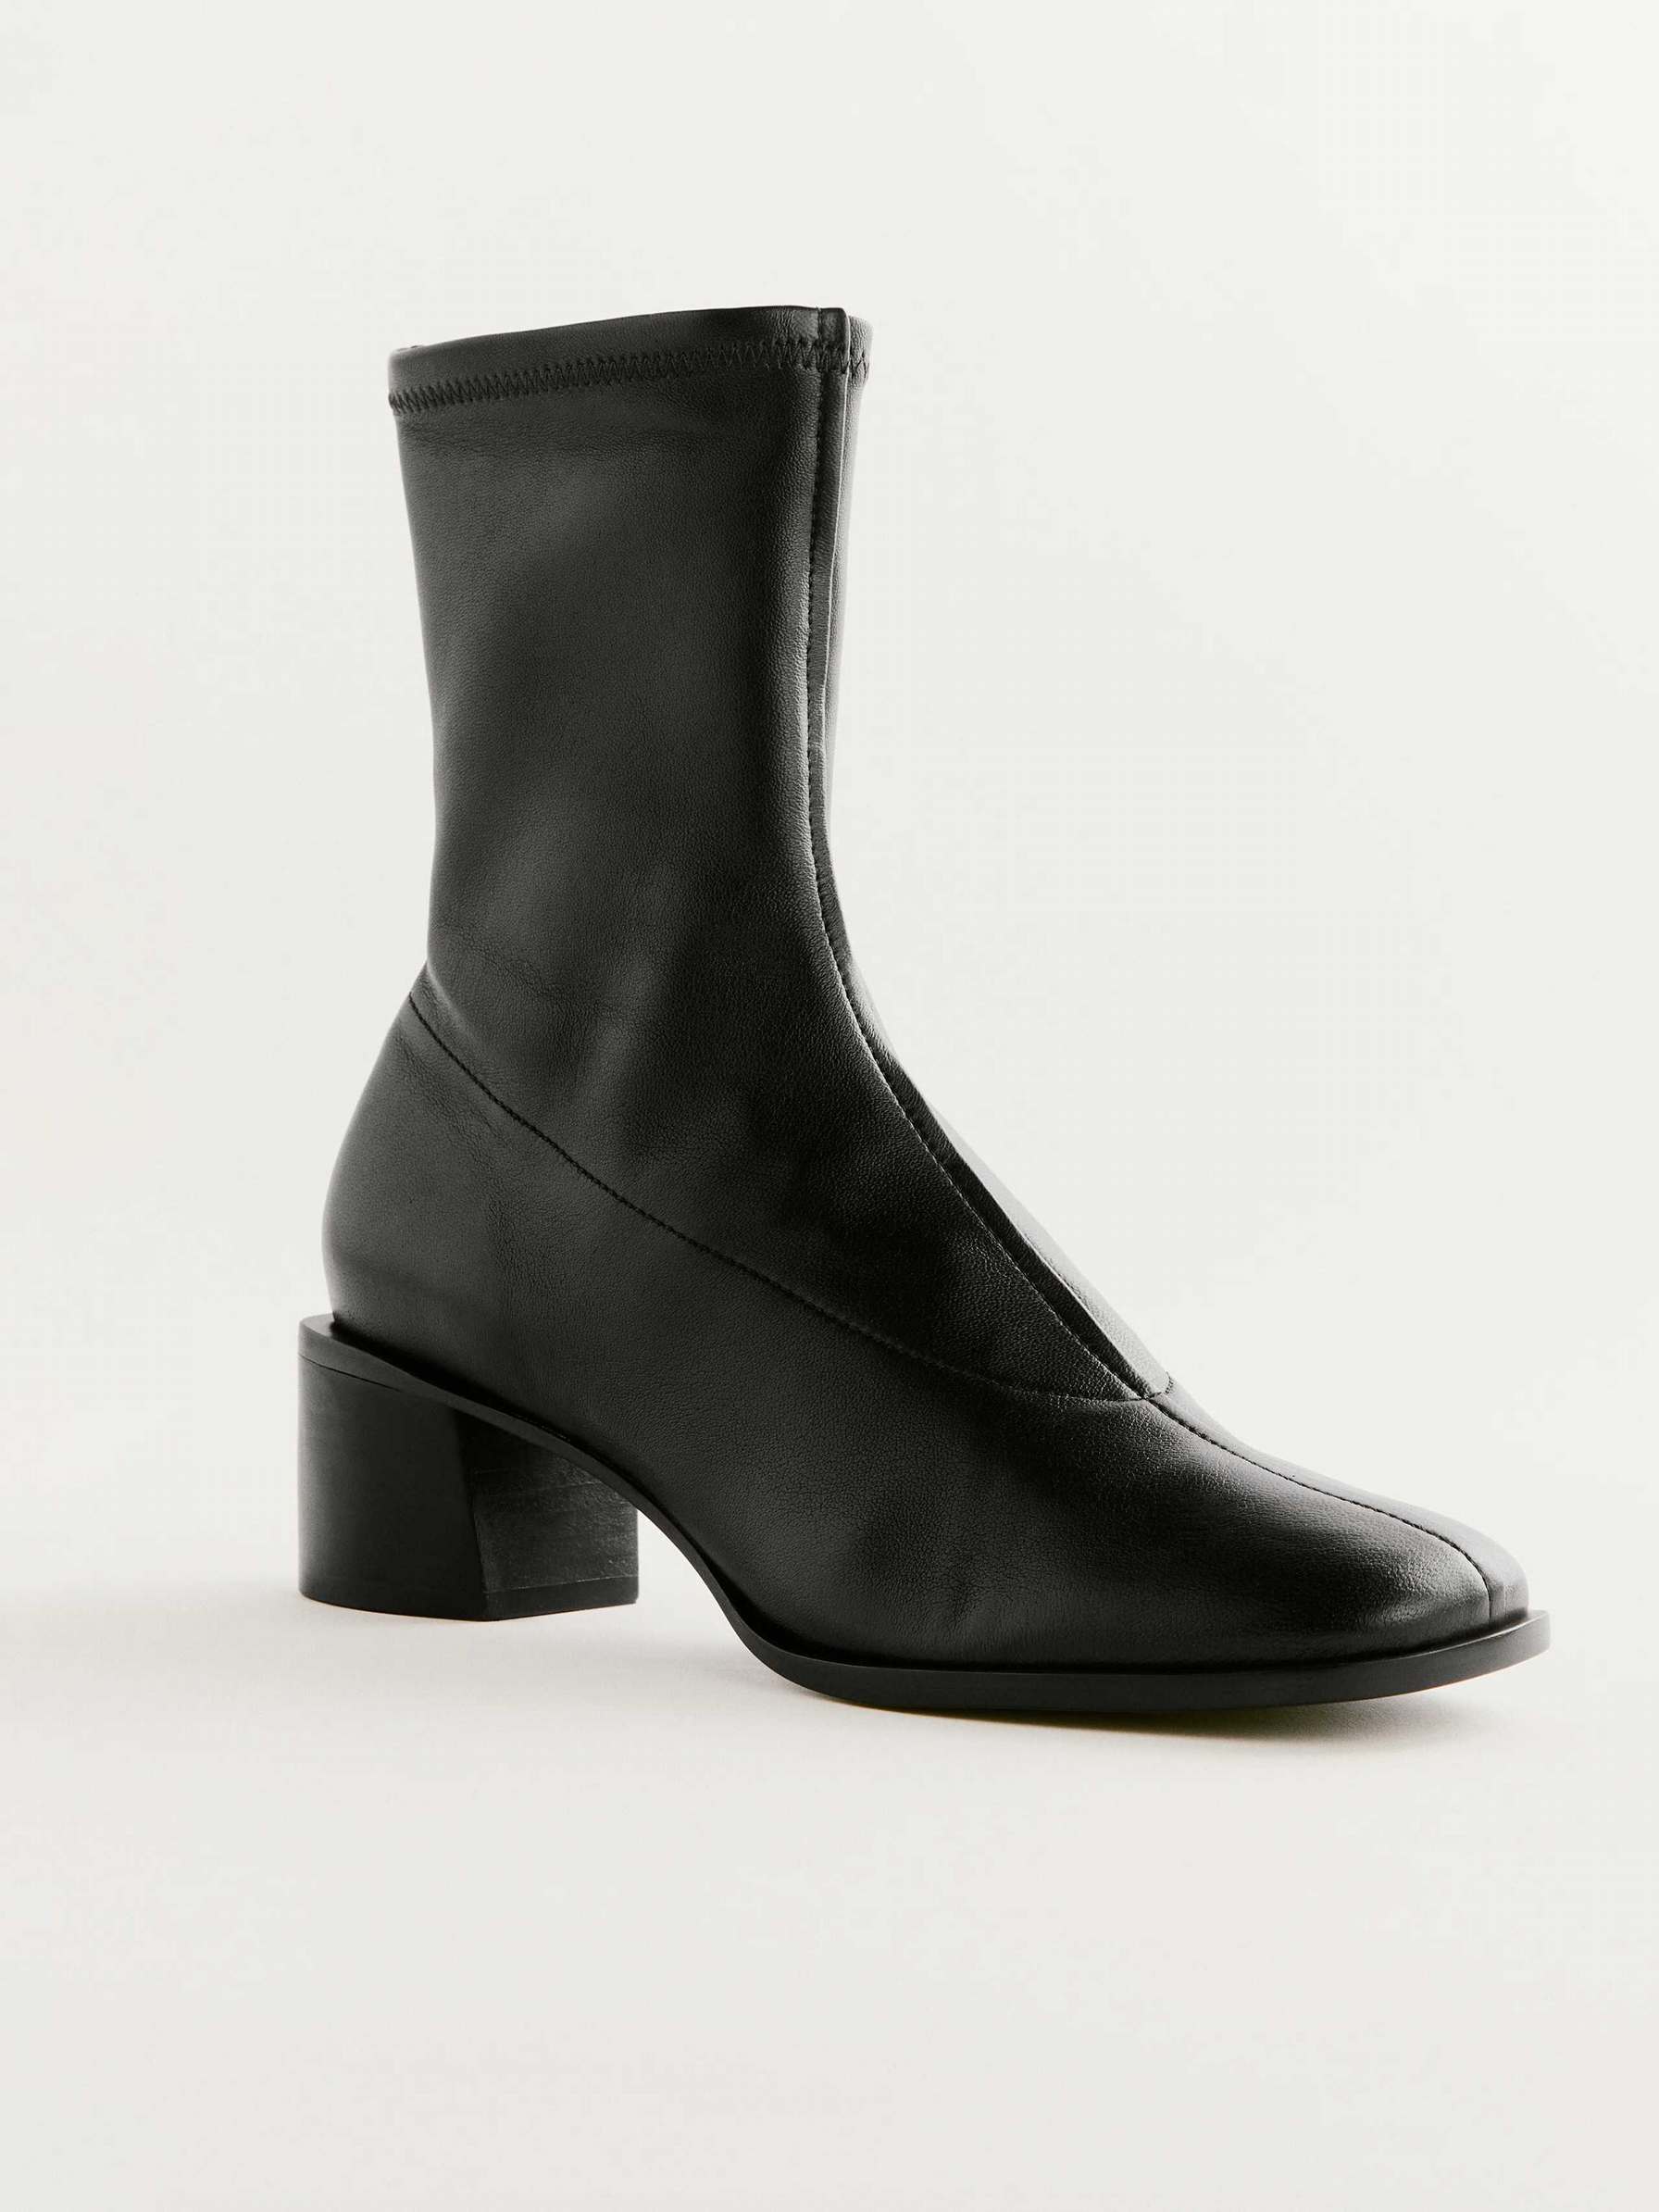 Reformation Louie Stretch Women's Booties Black | OUTLET-710482